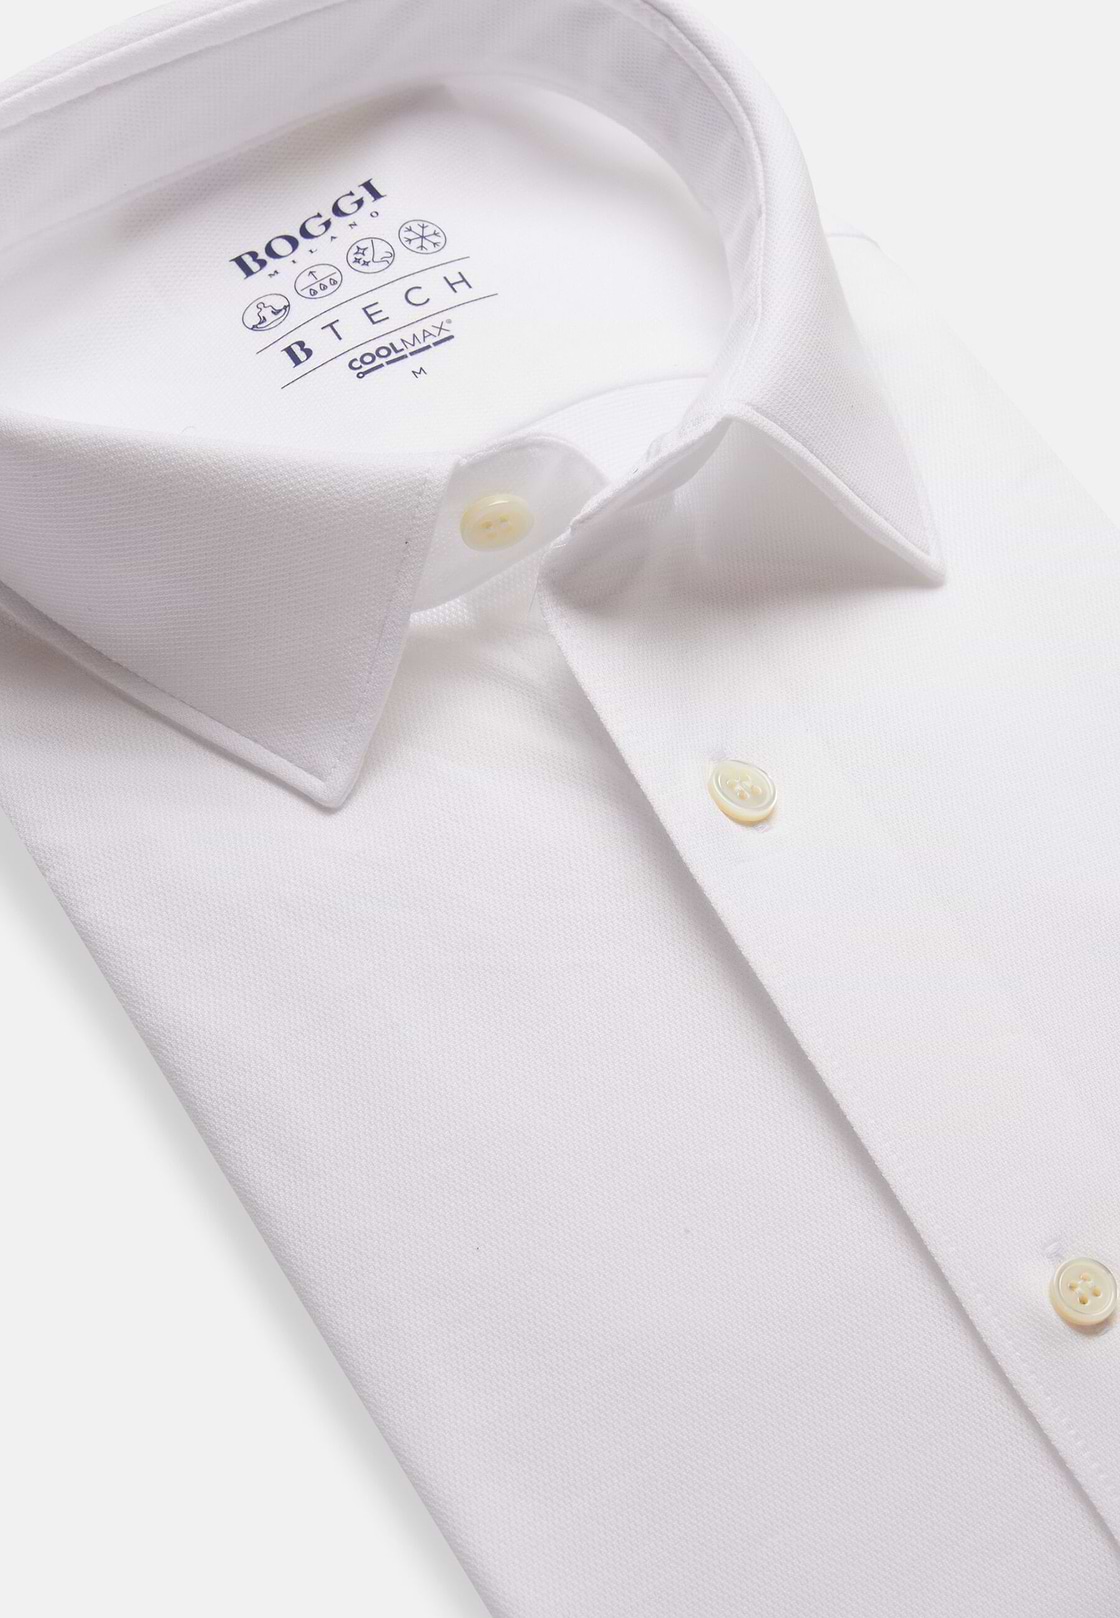 Slim Fit White Shirt in Cotton and COOLMAX®, White, hi-res